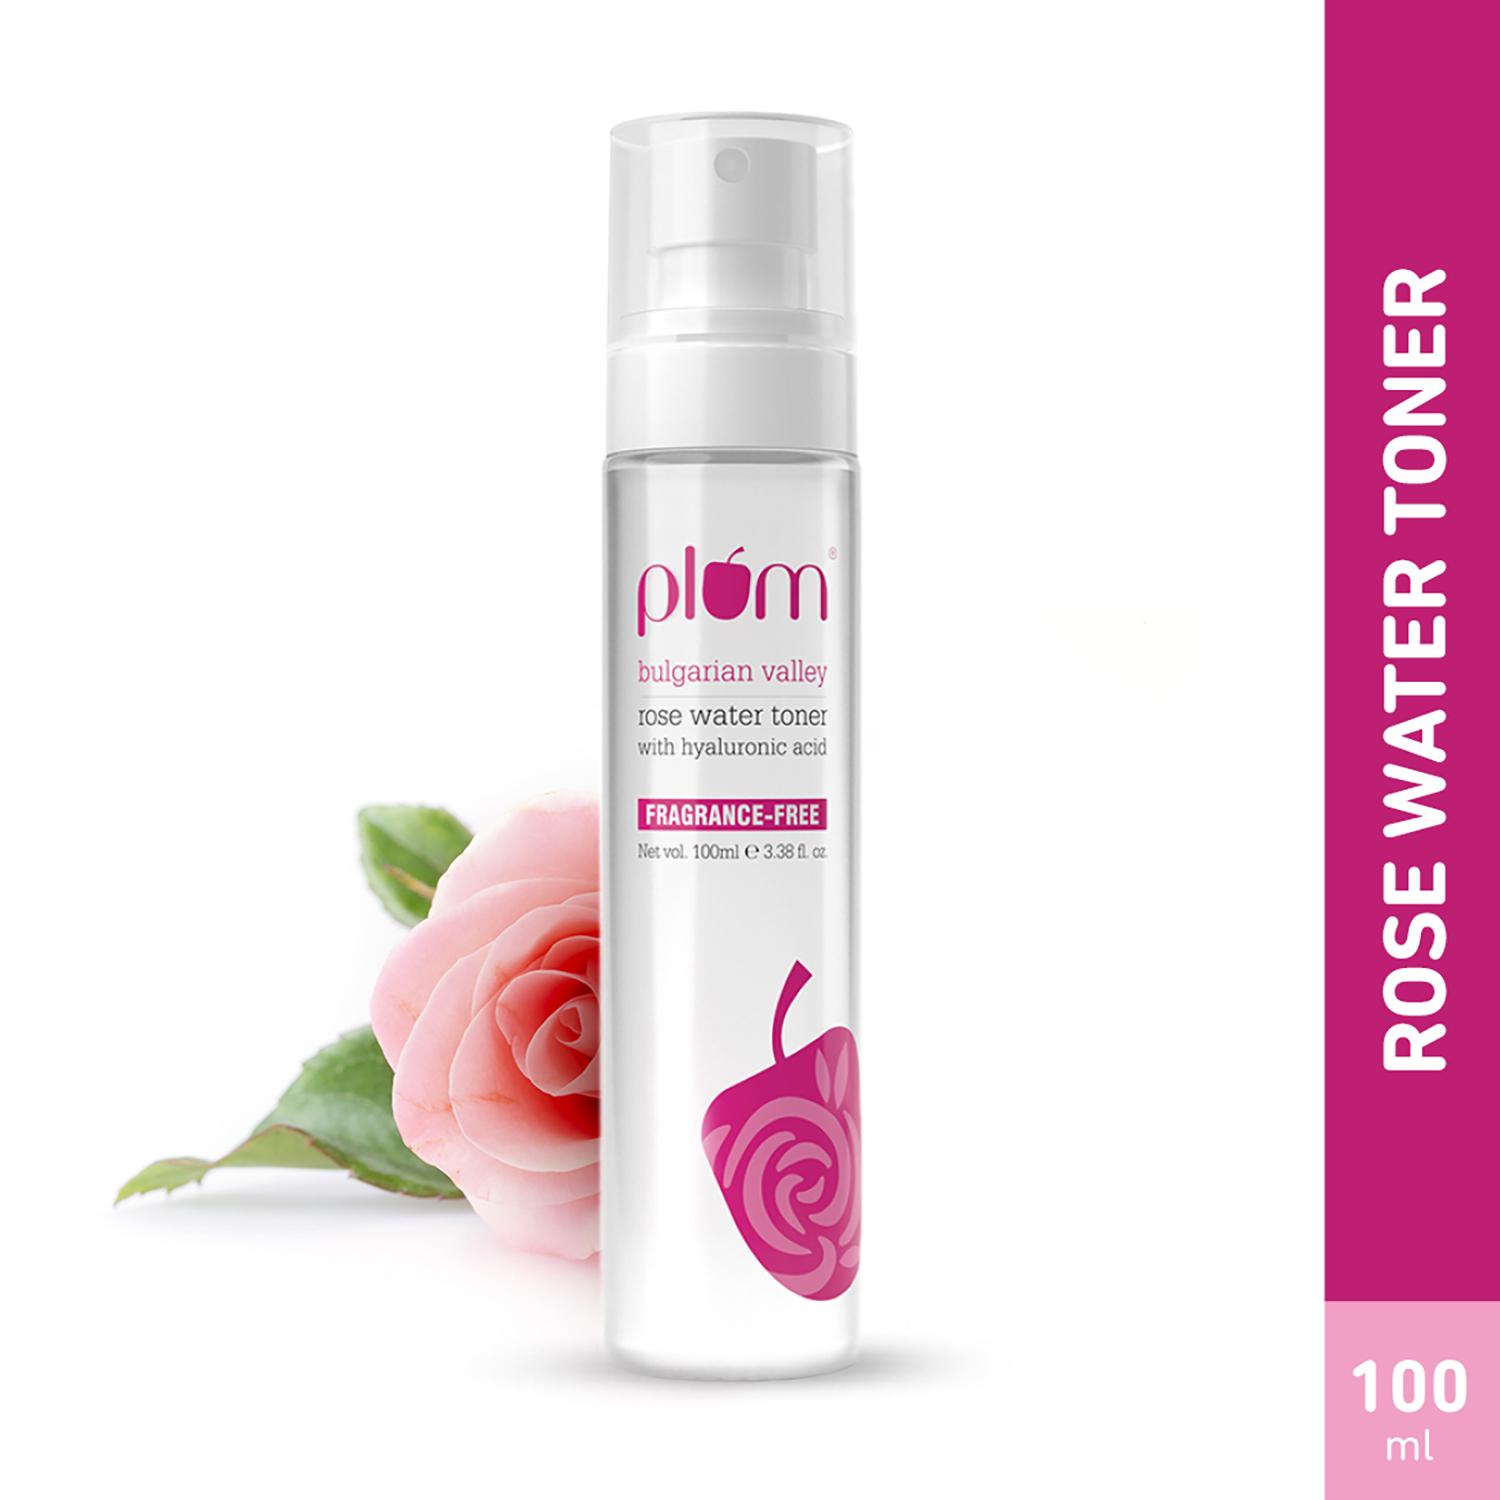 Plum | Plum Bulgarian Valley Rose Water Alcohol-Free Toner, Hyaluronic Acid, Hydrates & Refreshes (100ml)